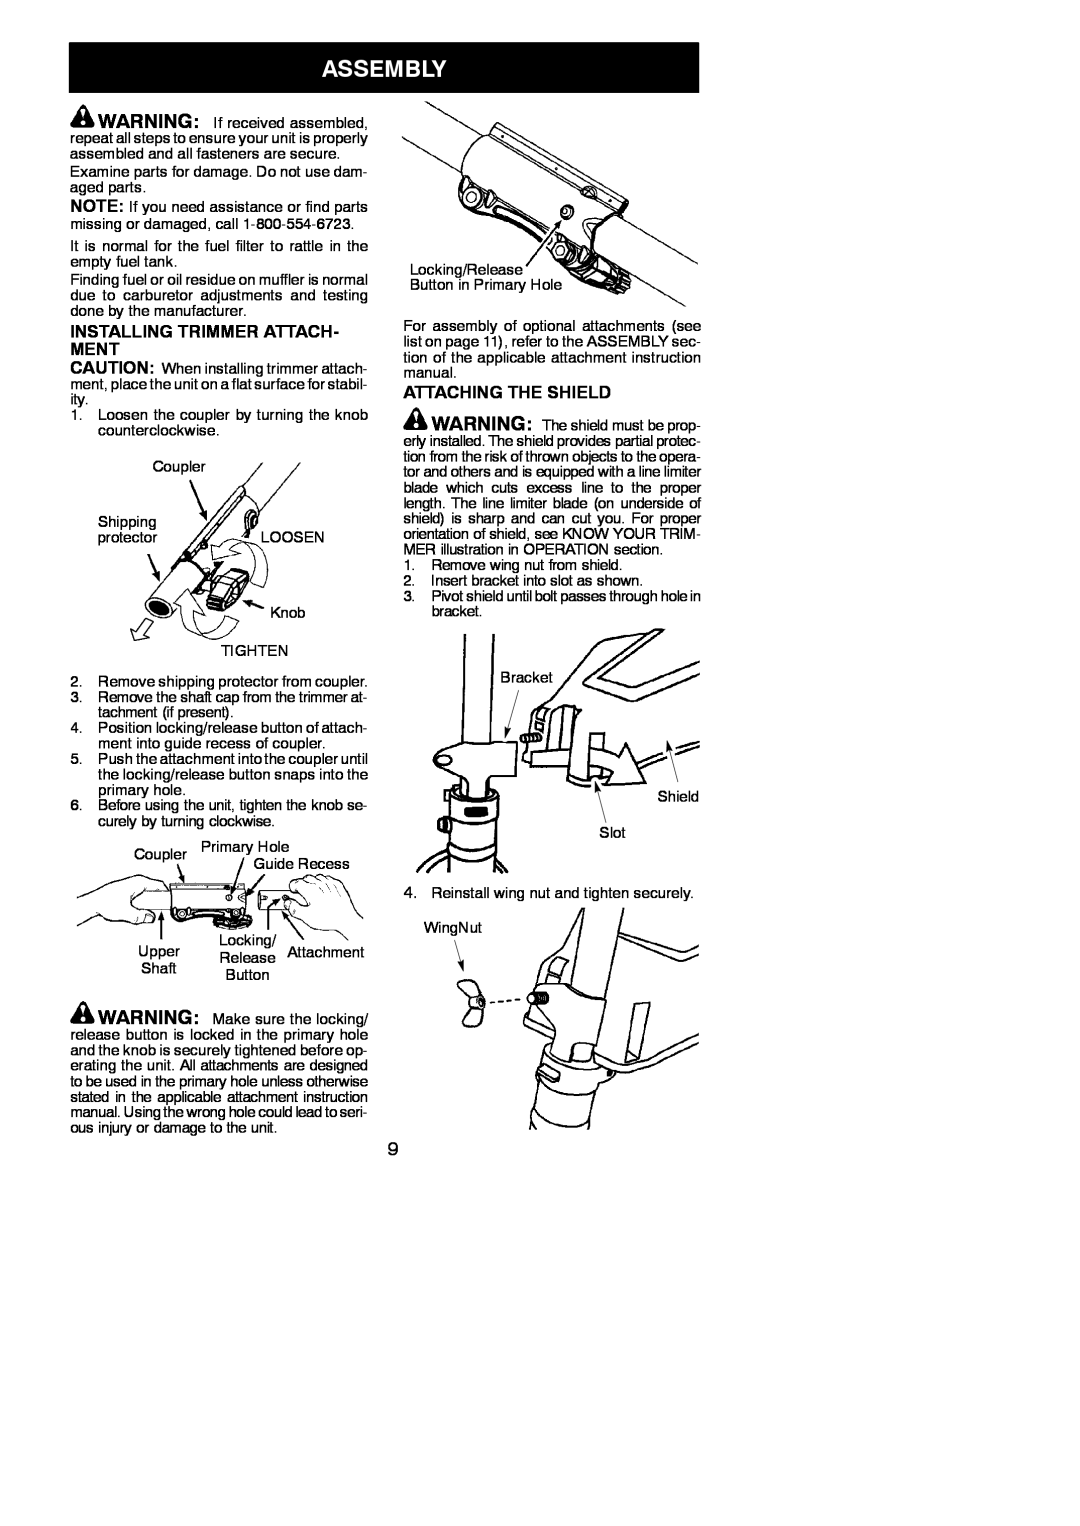 Poulan SM30SB, 966479401, 115225426 instruction manual Assembly, Installing Trimmer Attach- Ment, Attaching The Shield 